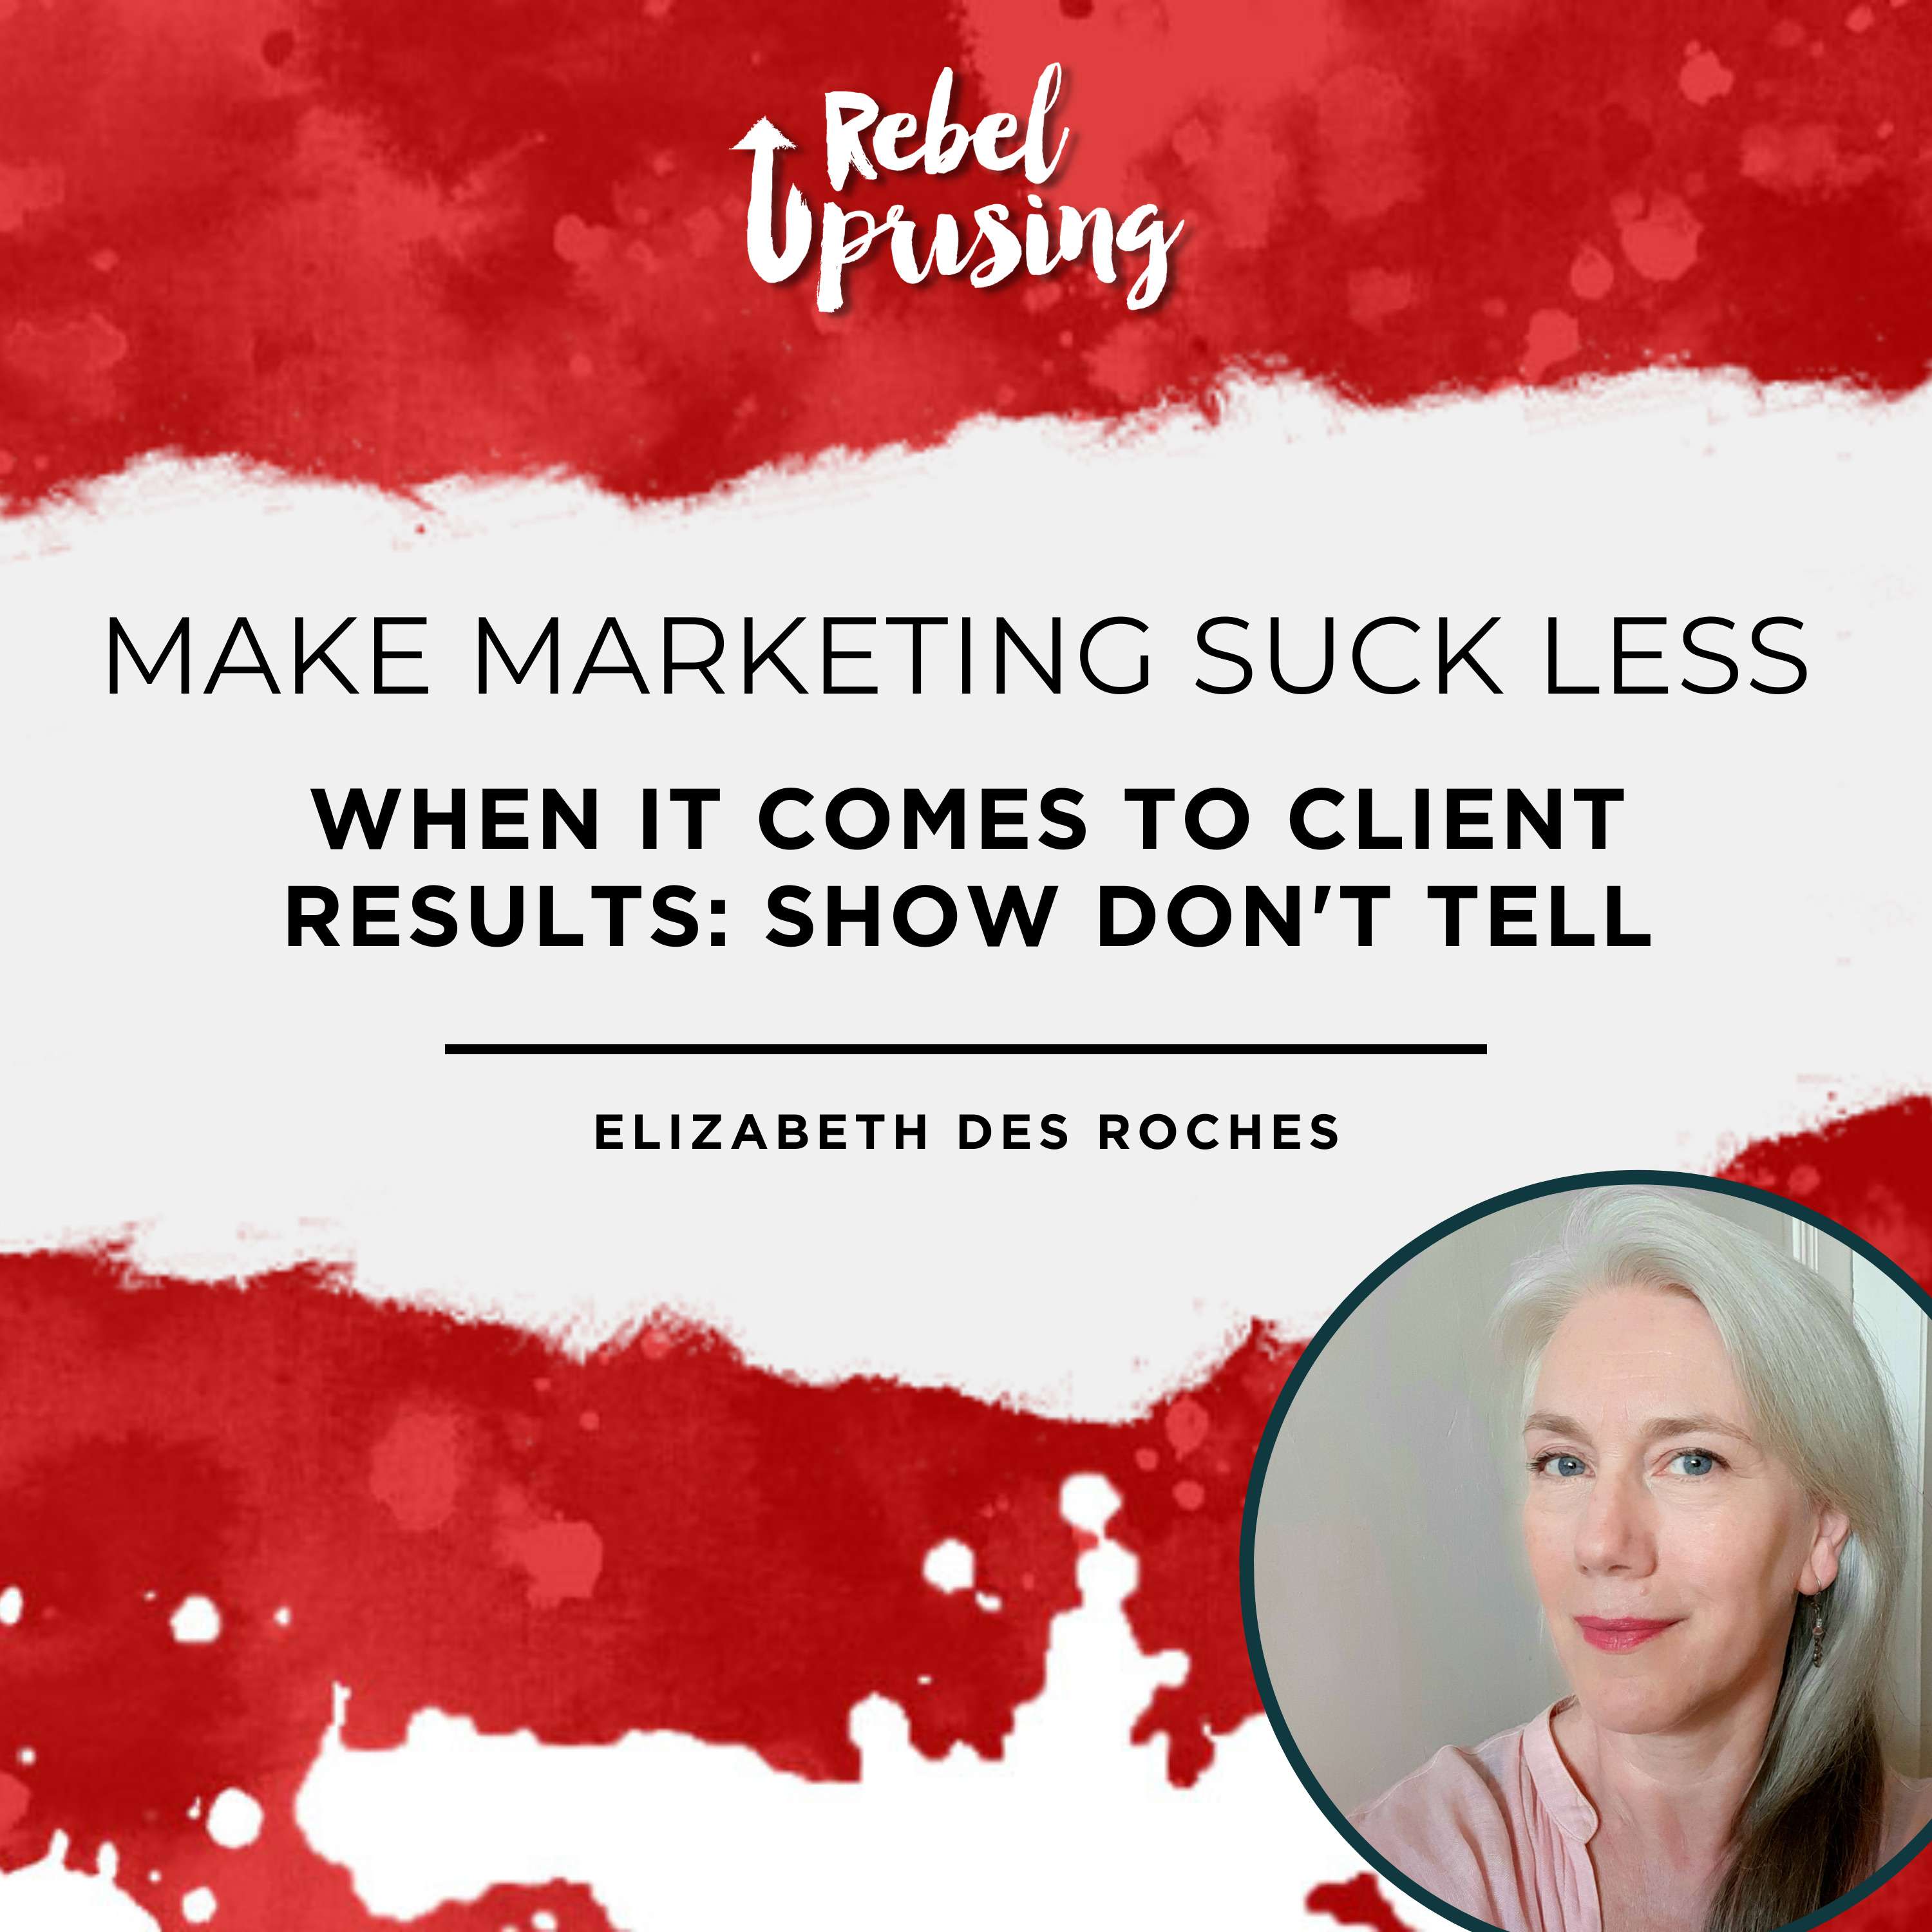 [MMSL] When It Comes to Client Results: Show Don’t Tell with Elizabeth des Roches